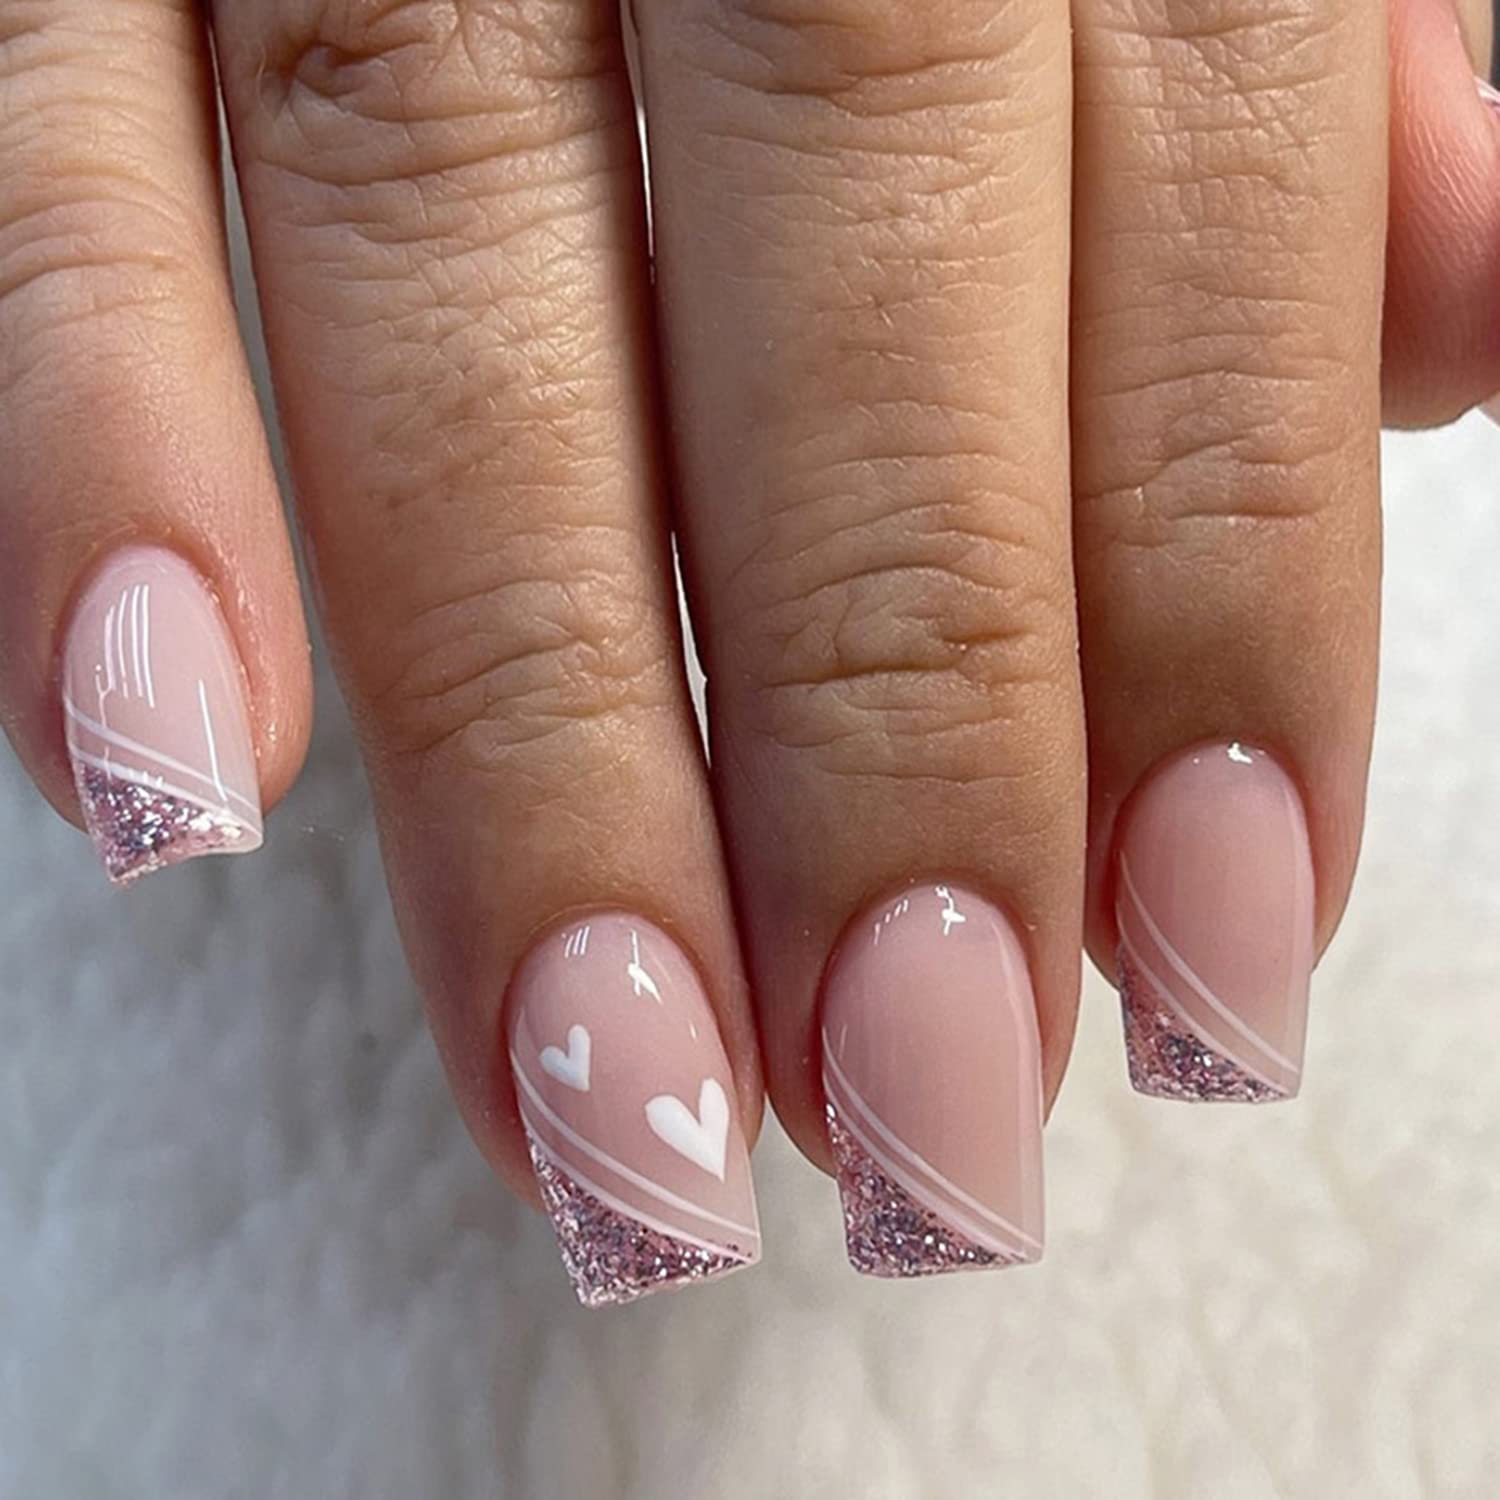 Porcelain Press on Nails Glue on Nails Long Nails Stick on Nails Fake Nails  Gifts for Her Coffin Nails Reusable Nails - Etsy